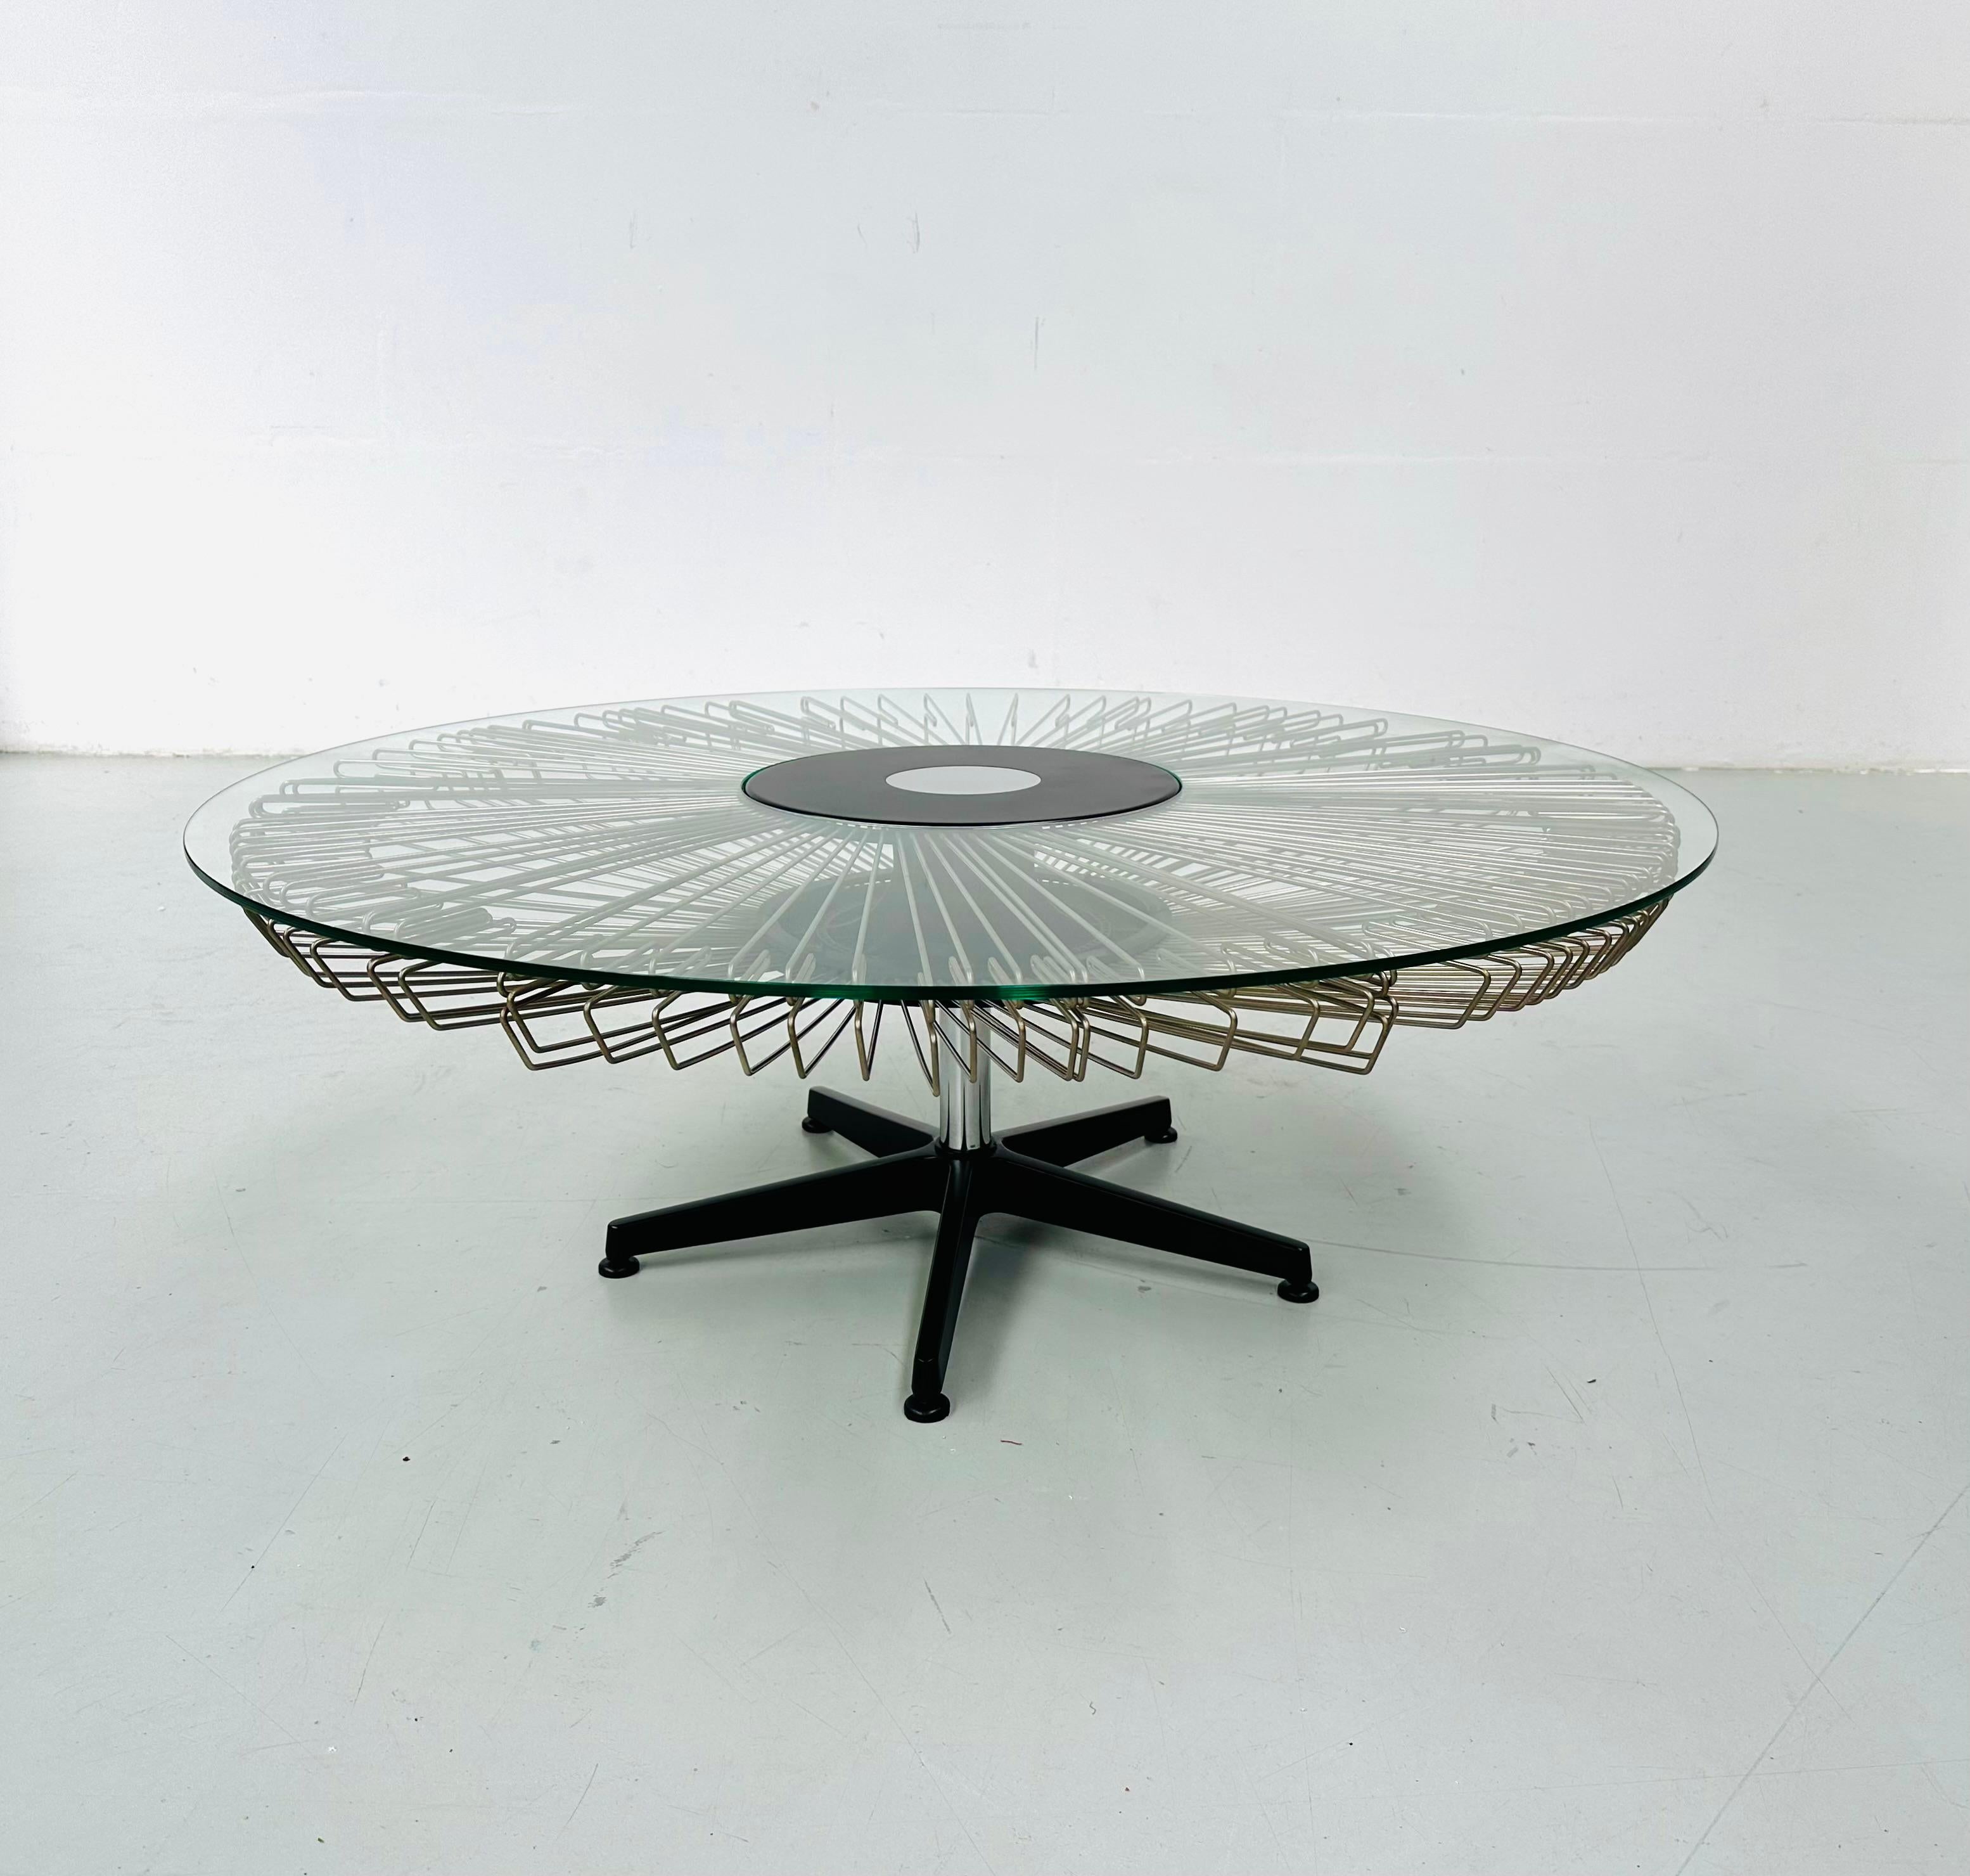 20th Century Italian Rotating Glass and Metal Coffee Table designed for Prada, 1990s. For Sale